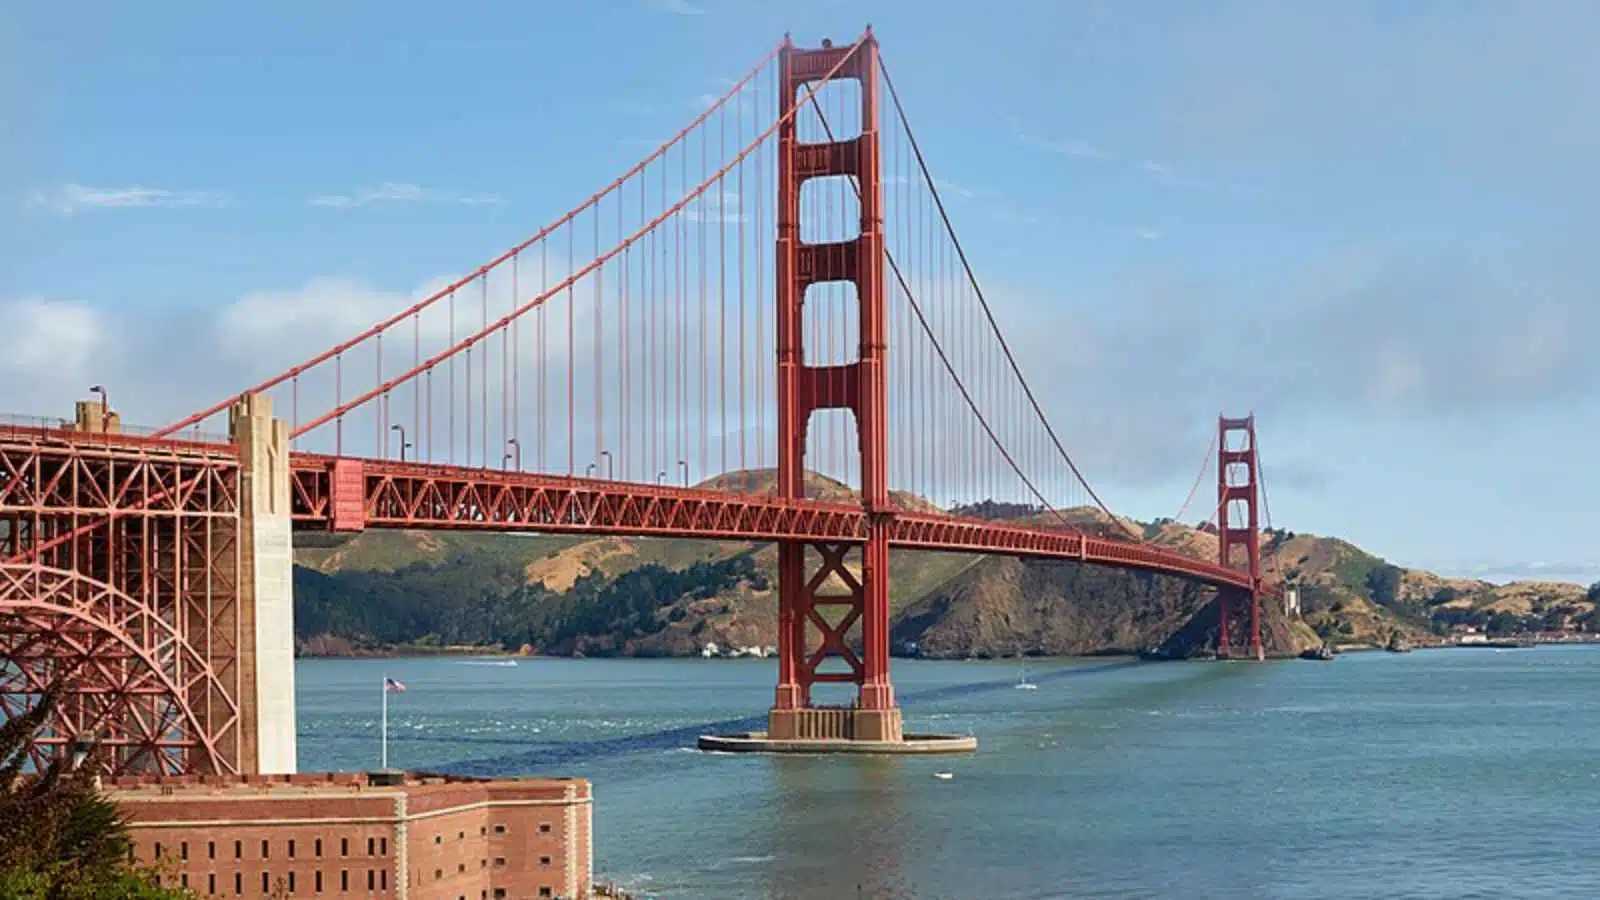 <p>Buckle up if the travel bug is gnawing at you, or you're just a self-proclaimed history buff! Here are 15 timeless American landmarks that deserve a spot on your bucket list. And, if your bucket list doesn't exist yet, consider this a kick-start!</p> <p><a href="https://frenzhub.com/bucket-list-wonders-explore-the-timeless-beauty-of-these-14-american-landmarks/" rel="noopener"><strong>Bucket List Wonders: Explore the Timeless Beauty of These 14 American Landmarks</strong></a></p>